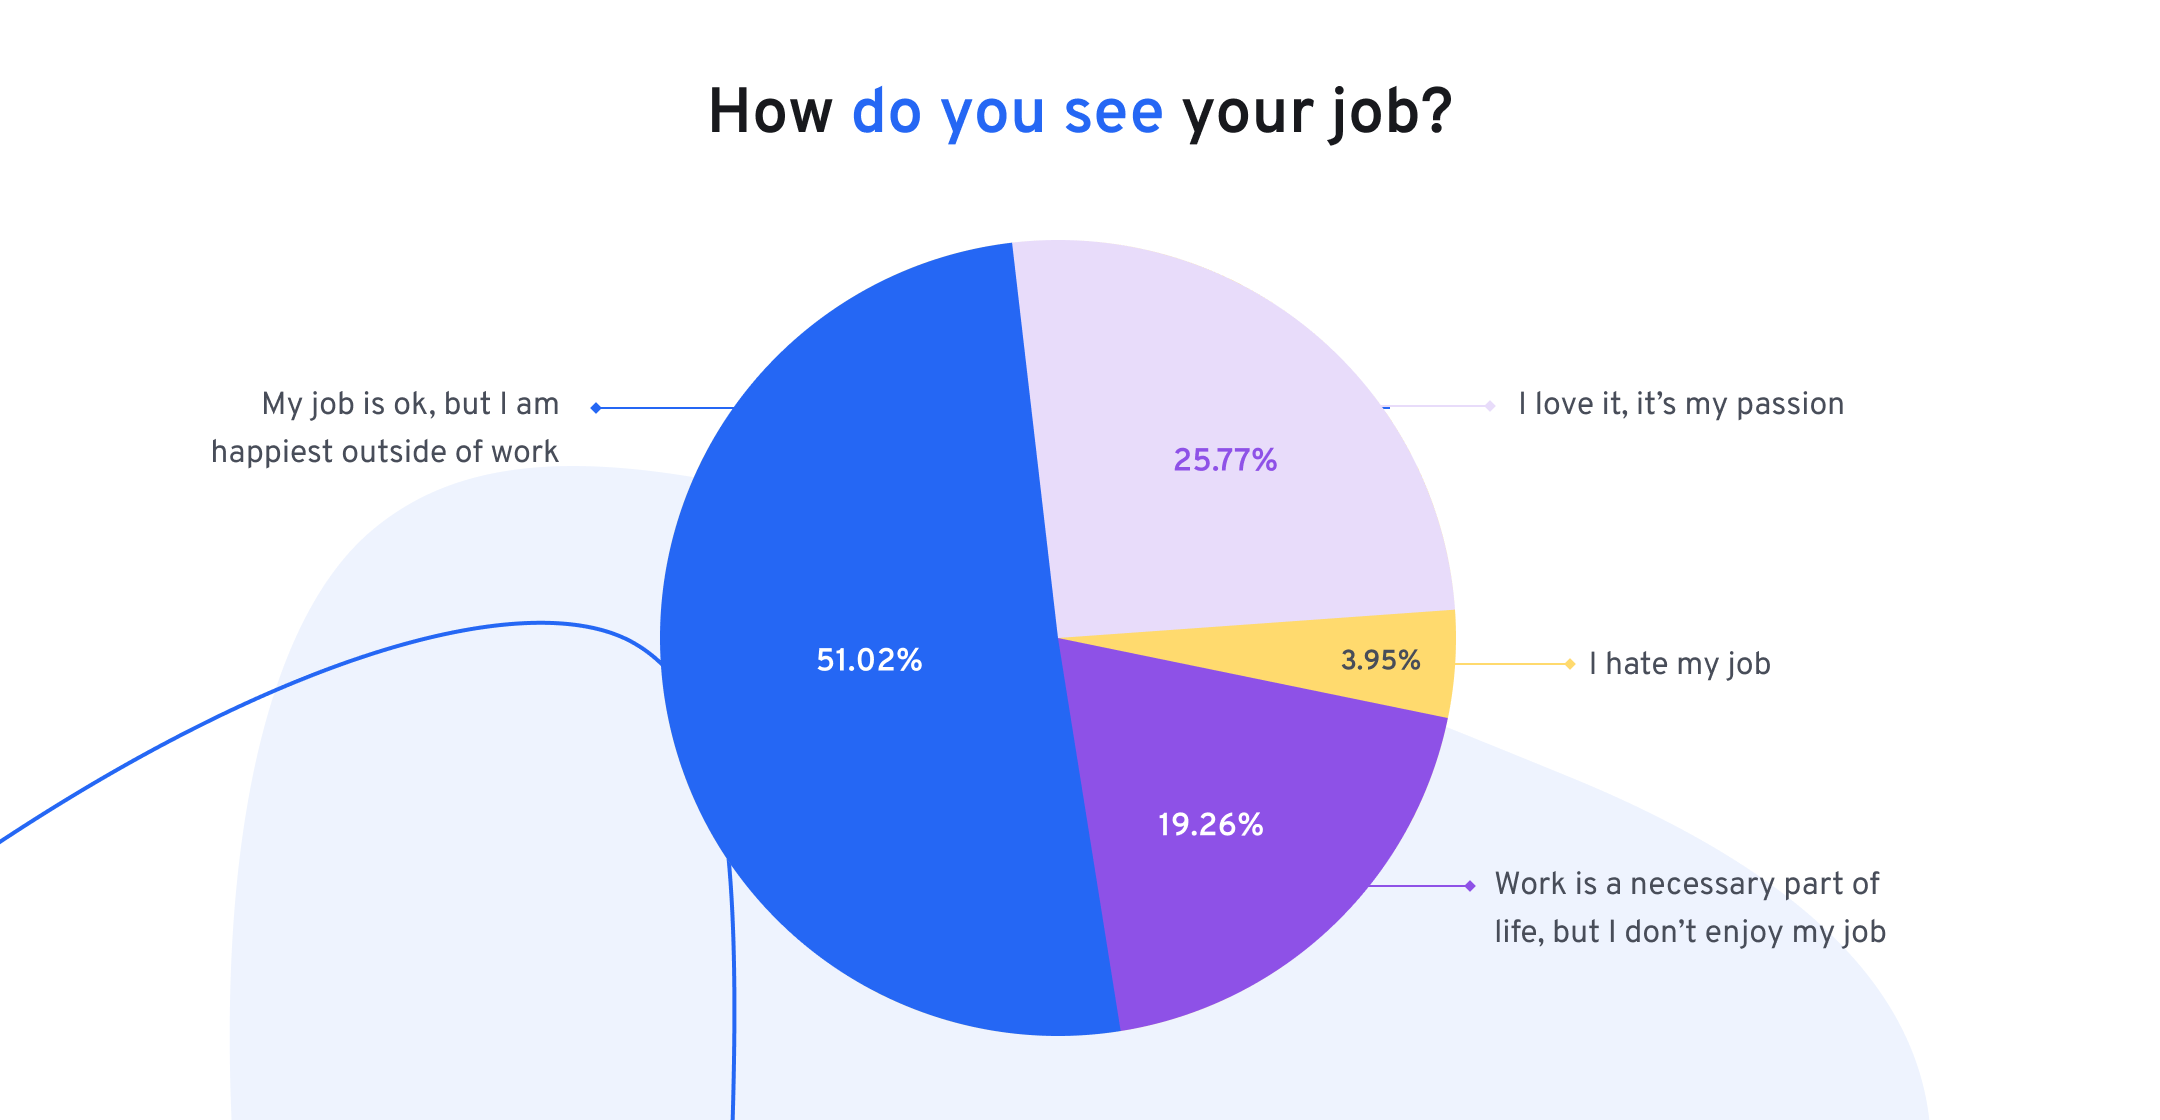 How people see their jobs